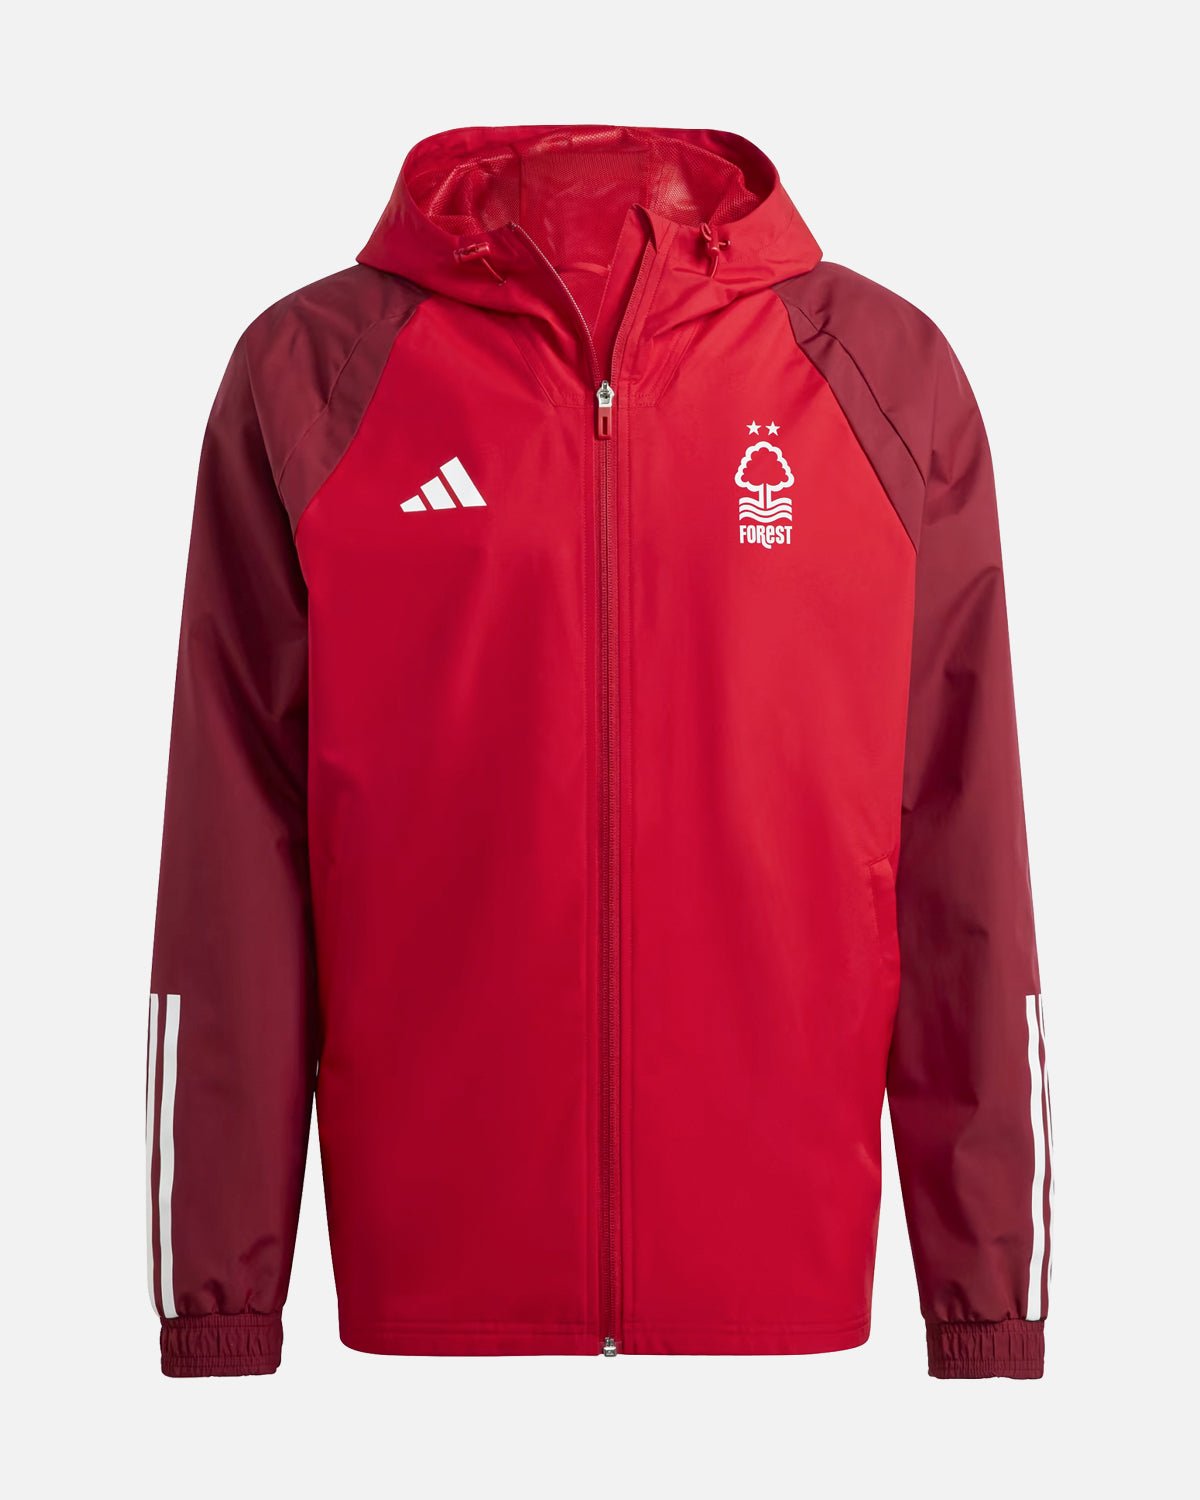 NFFC Junior Red All Weather Training Jacket 23-24 - Nottingham Forest FC